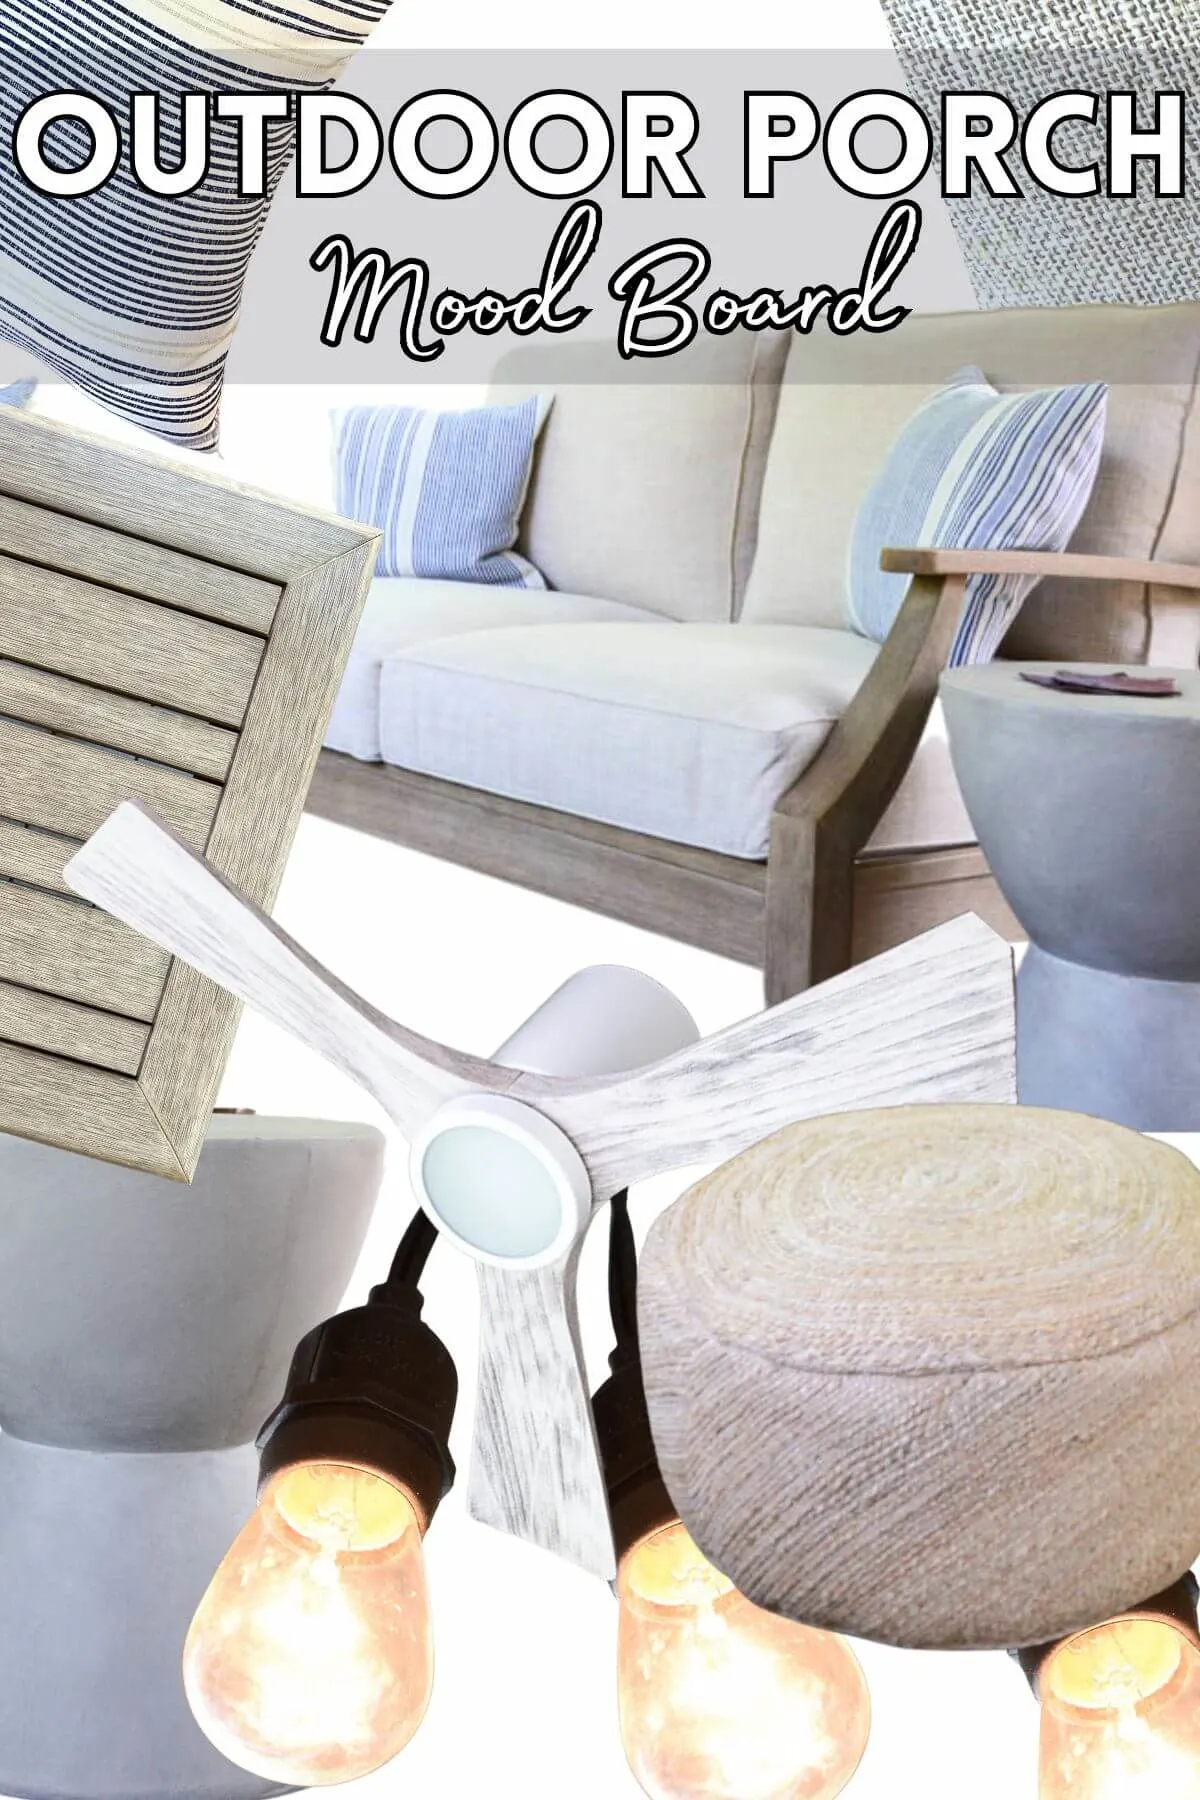 collage of outdoor furniture, lights and fan with text overlay outdoor porch mood board.